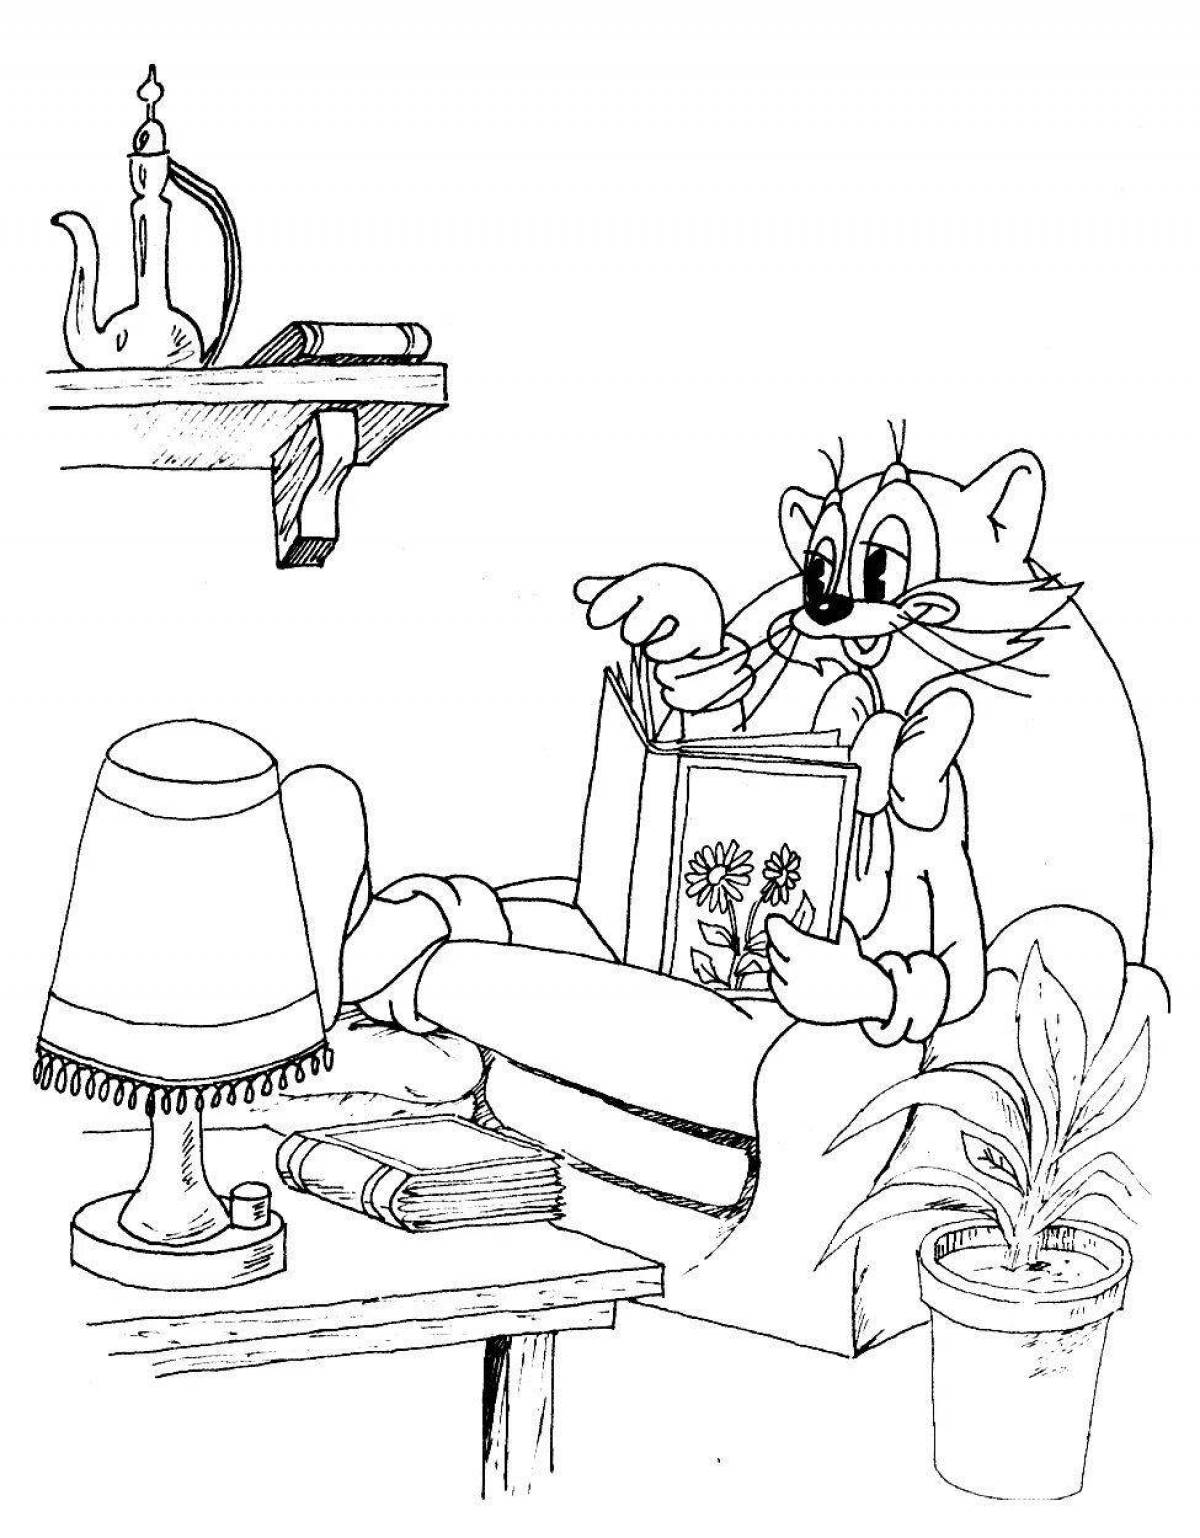 Fun coloring book for kids leopold cat